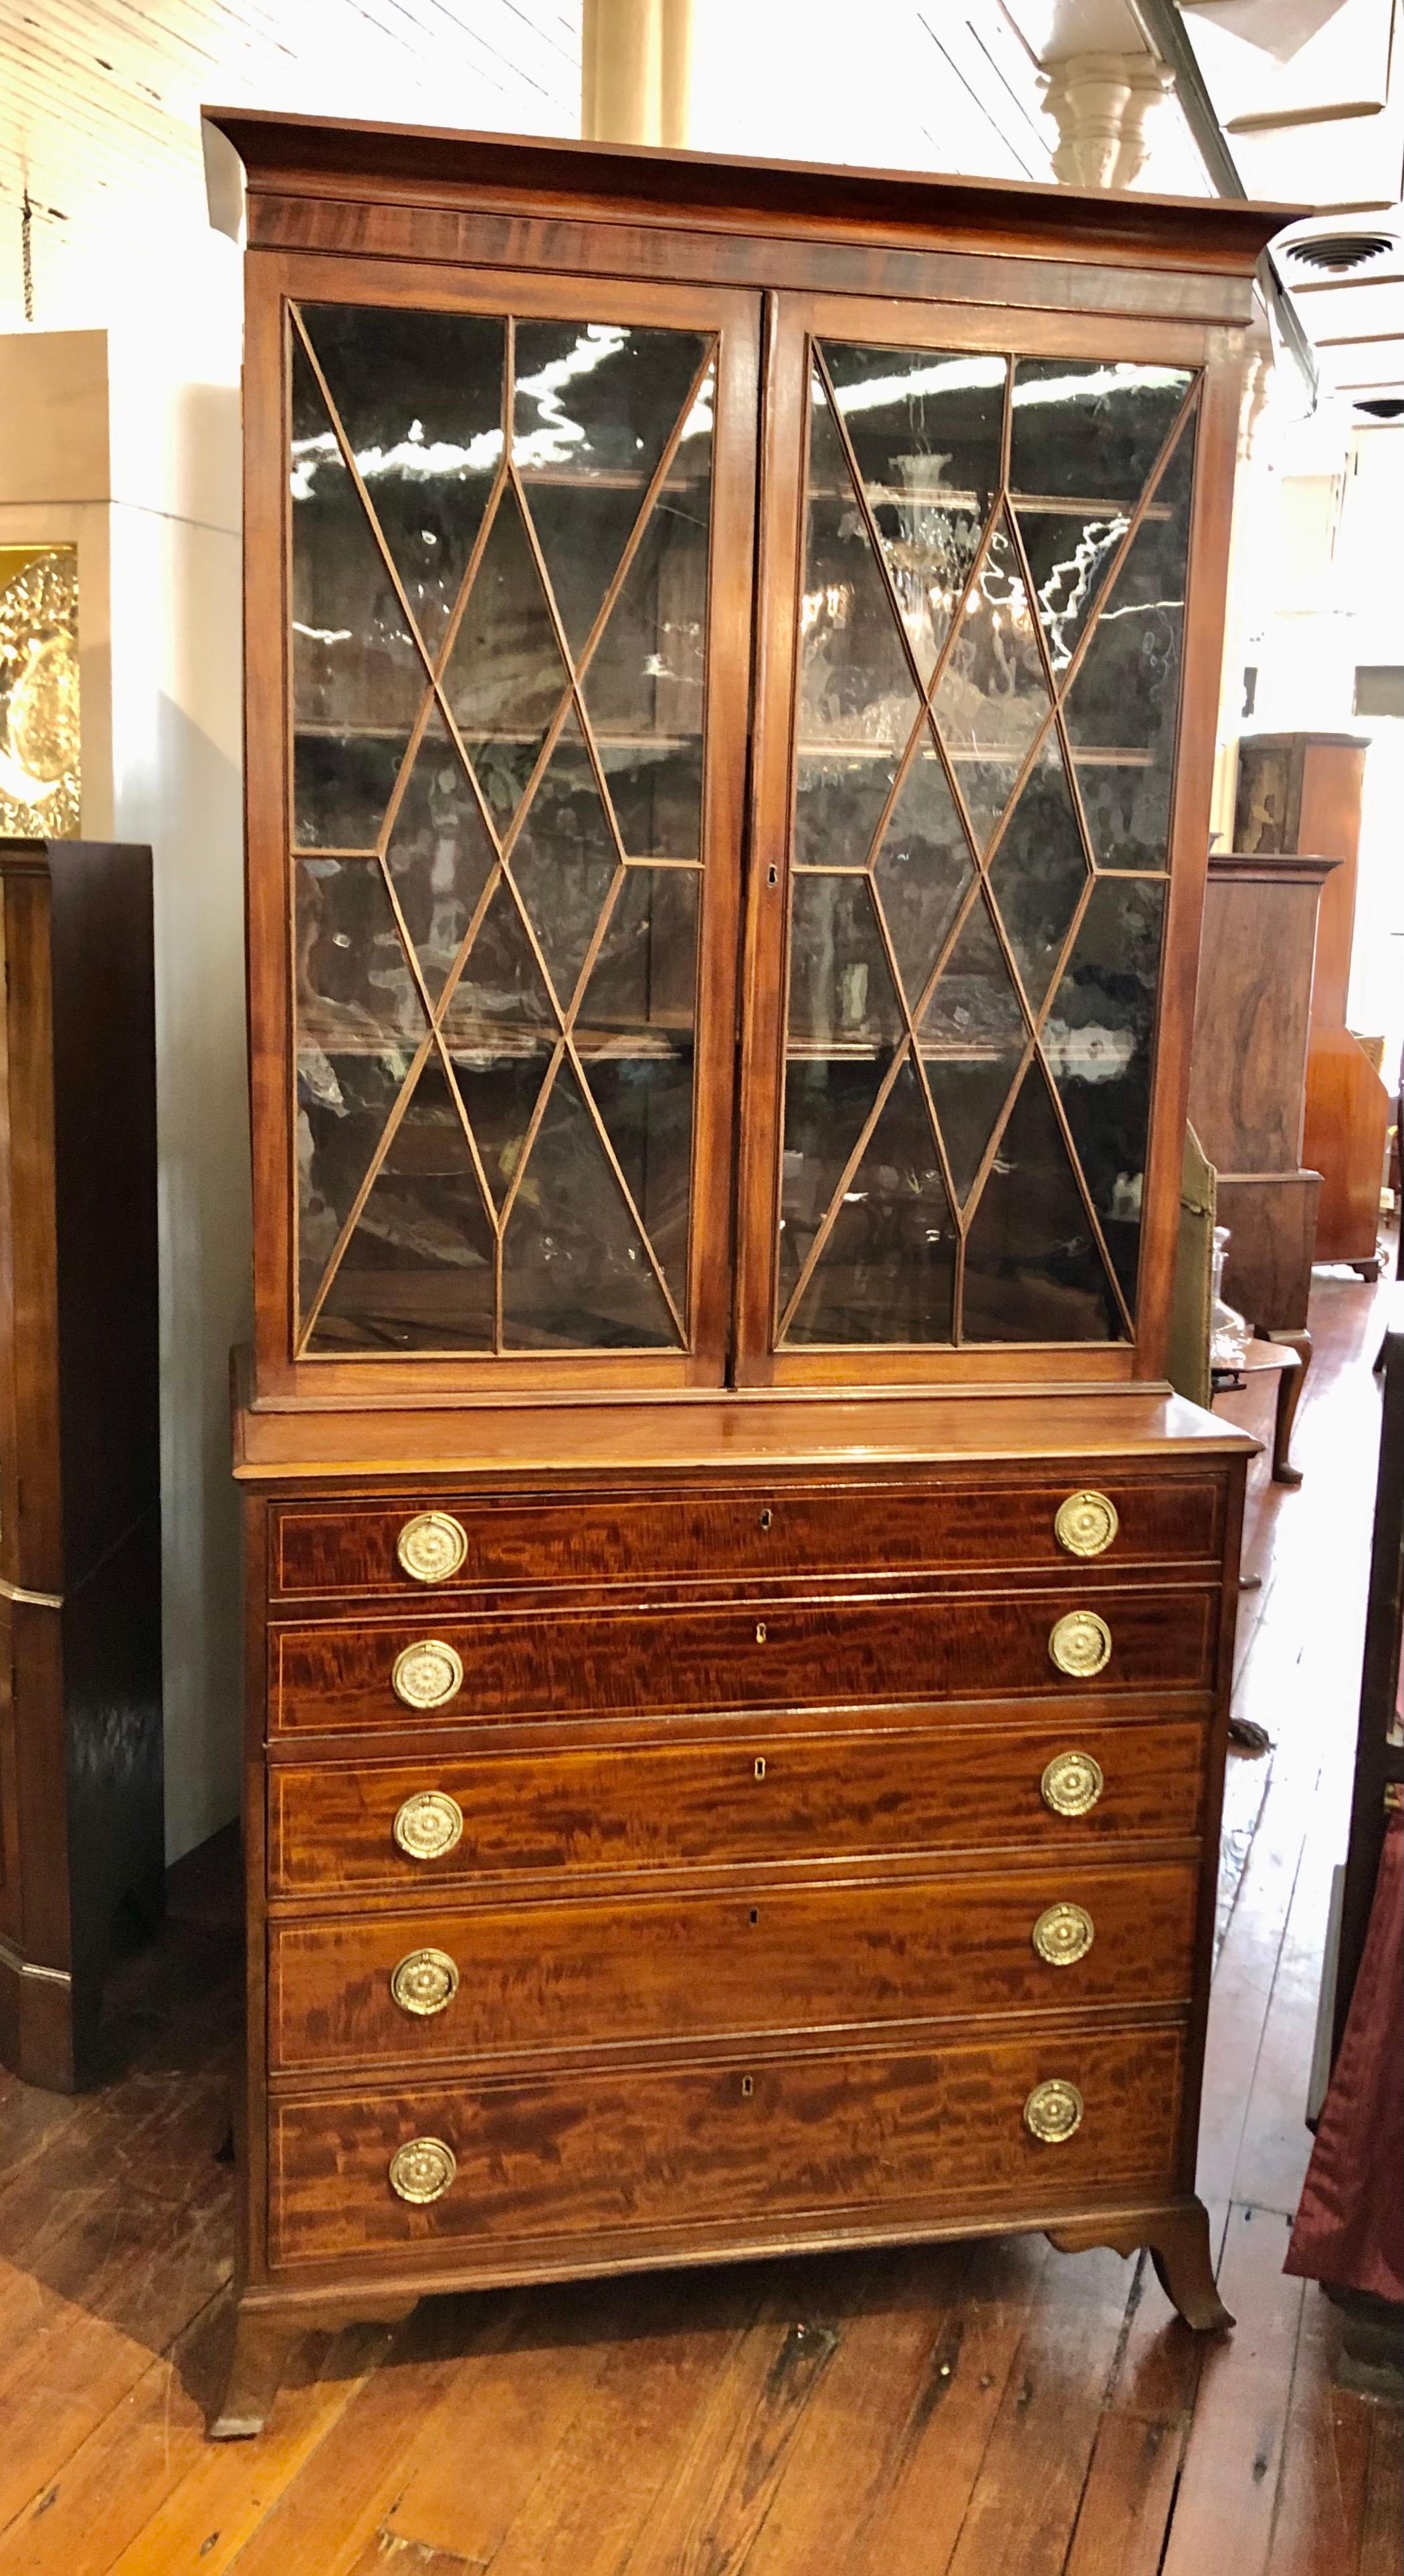 Wonderful Late Federal antique American (New York or Connecticut) finely figured Mahogany Secretaire Bookcase with glazed two-door upper section over a base having graduated drawers with the upper drawer opening to reveal a highly inlaid and fitted